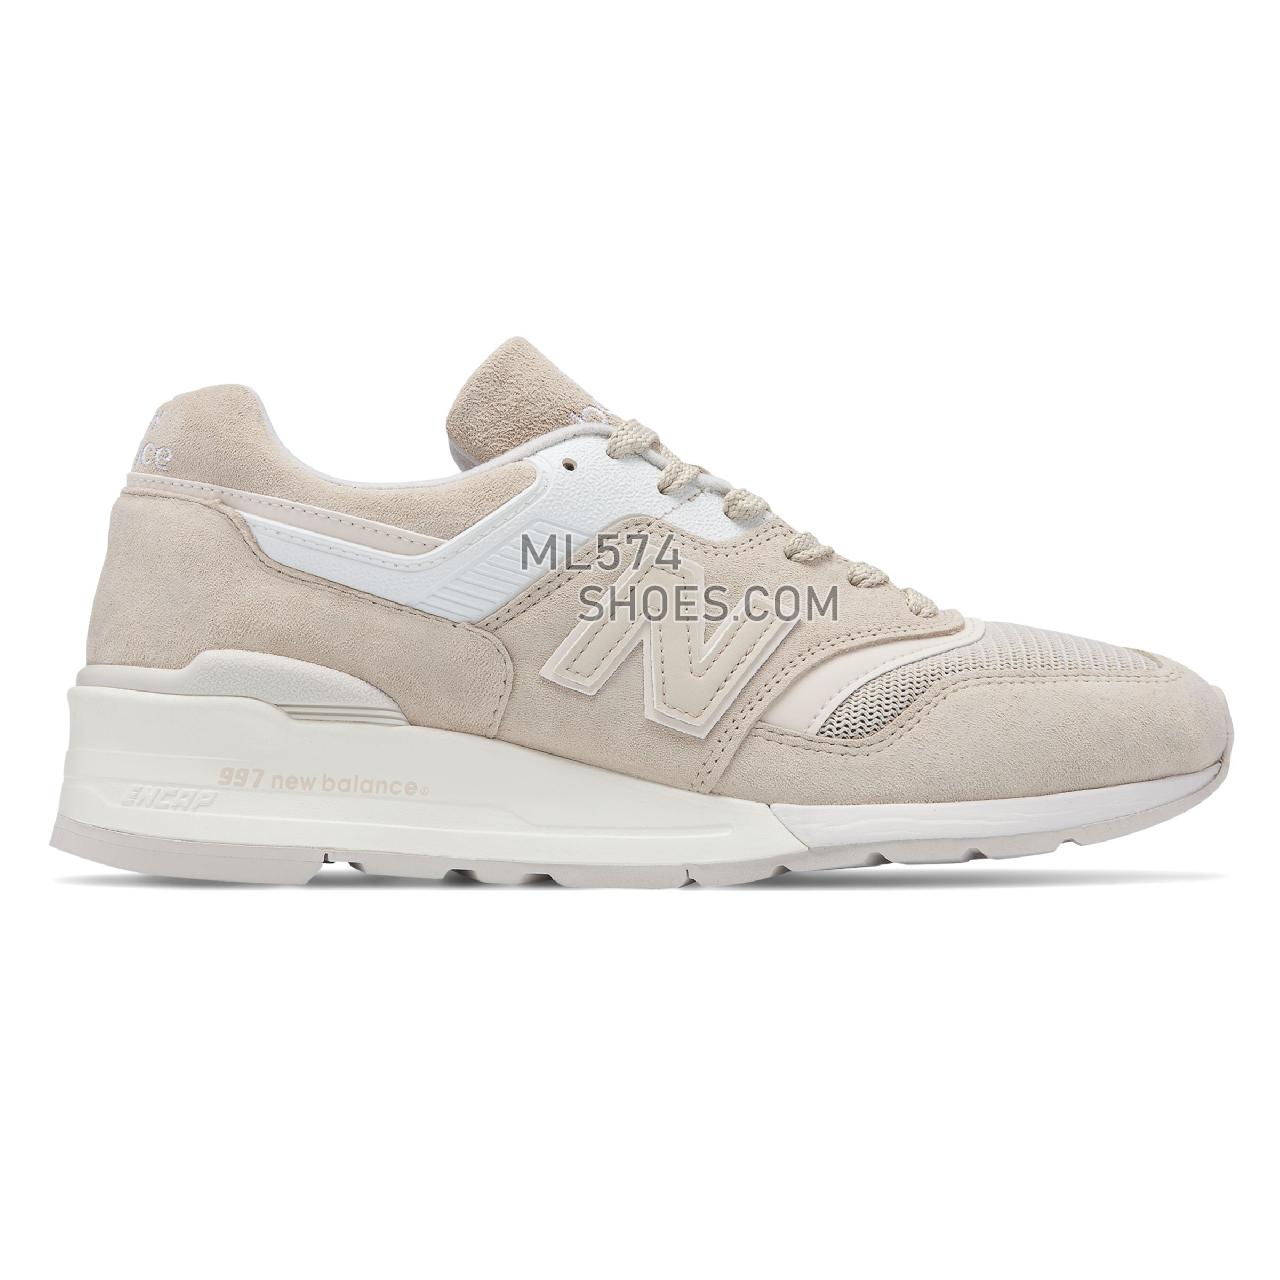 New Balance Made in US 997 - Men's 997 Made in US Classic M997-PGM - Tan with White - M997PAB